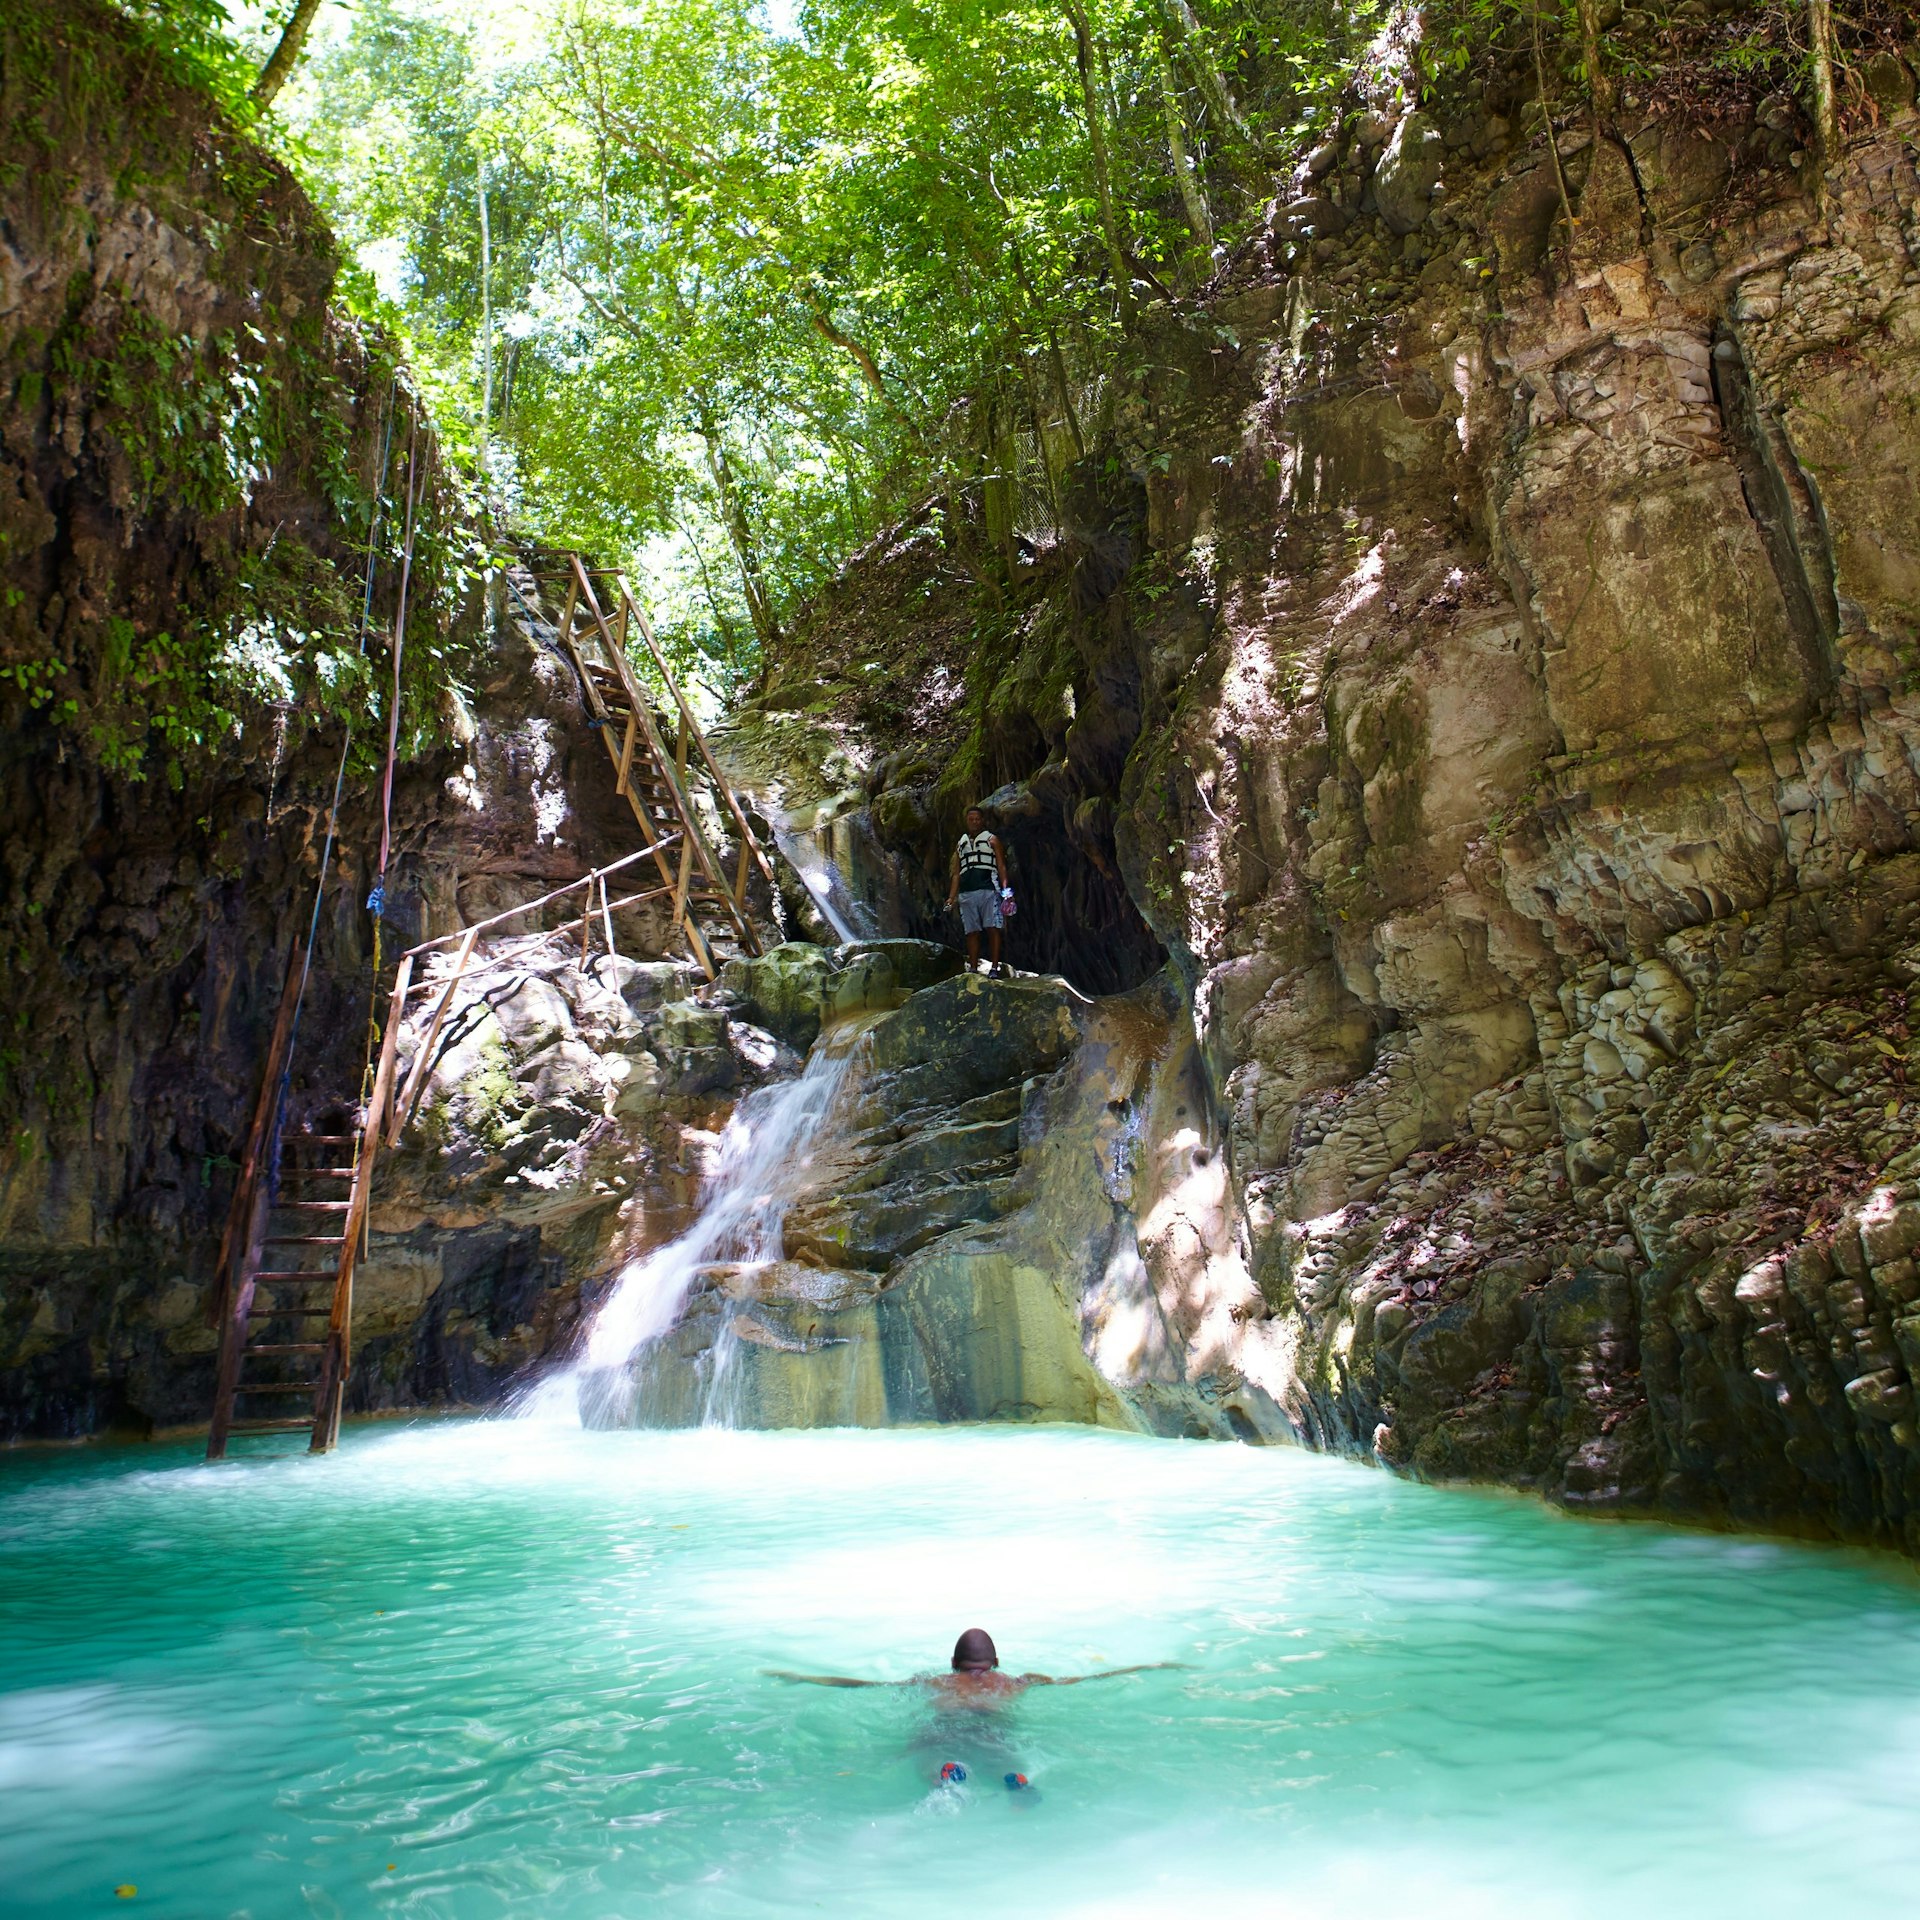 A man swimming in the bright blue waters of the pool by the Saltos de la Damajagua